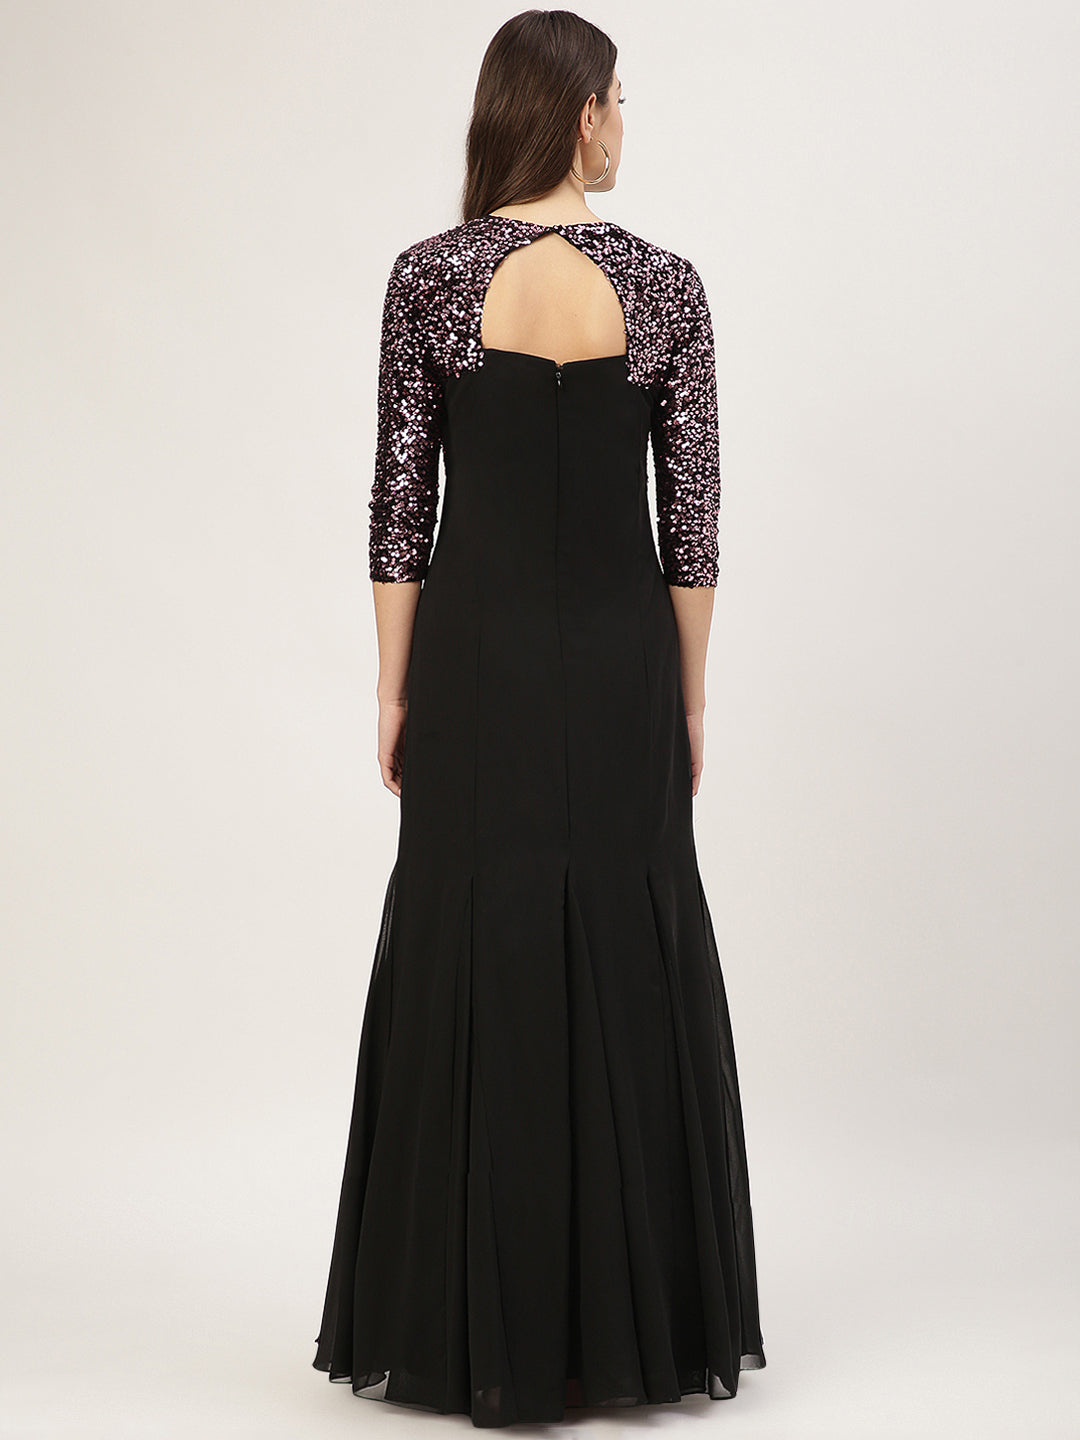 Pink & Black Embellished Gown with 3/4 Sleeves